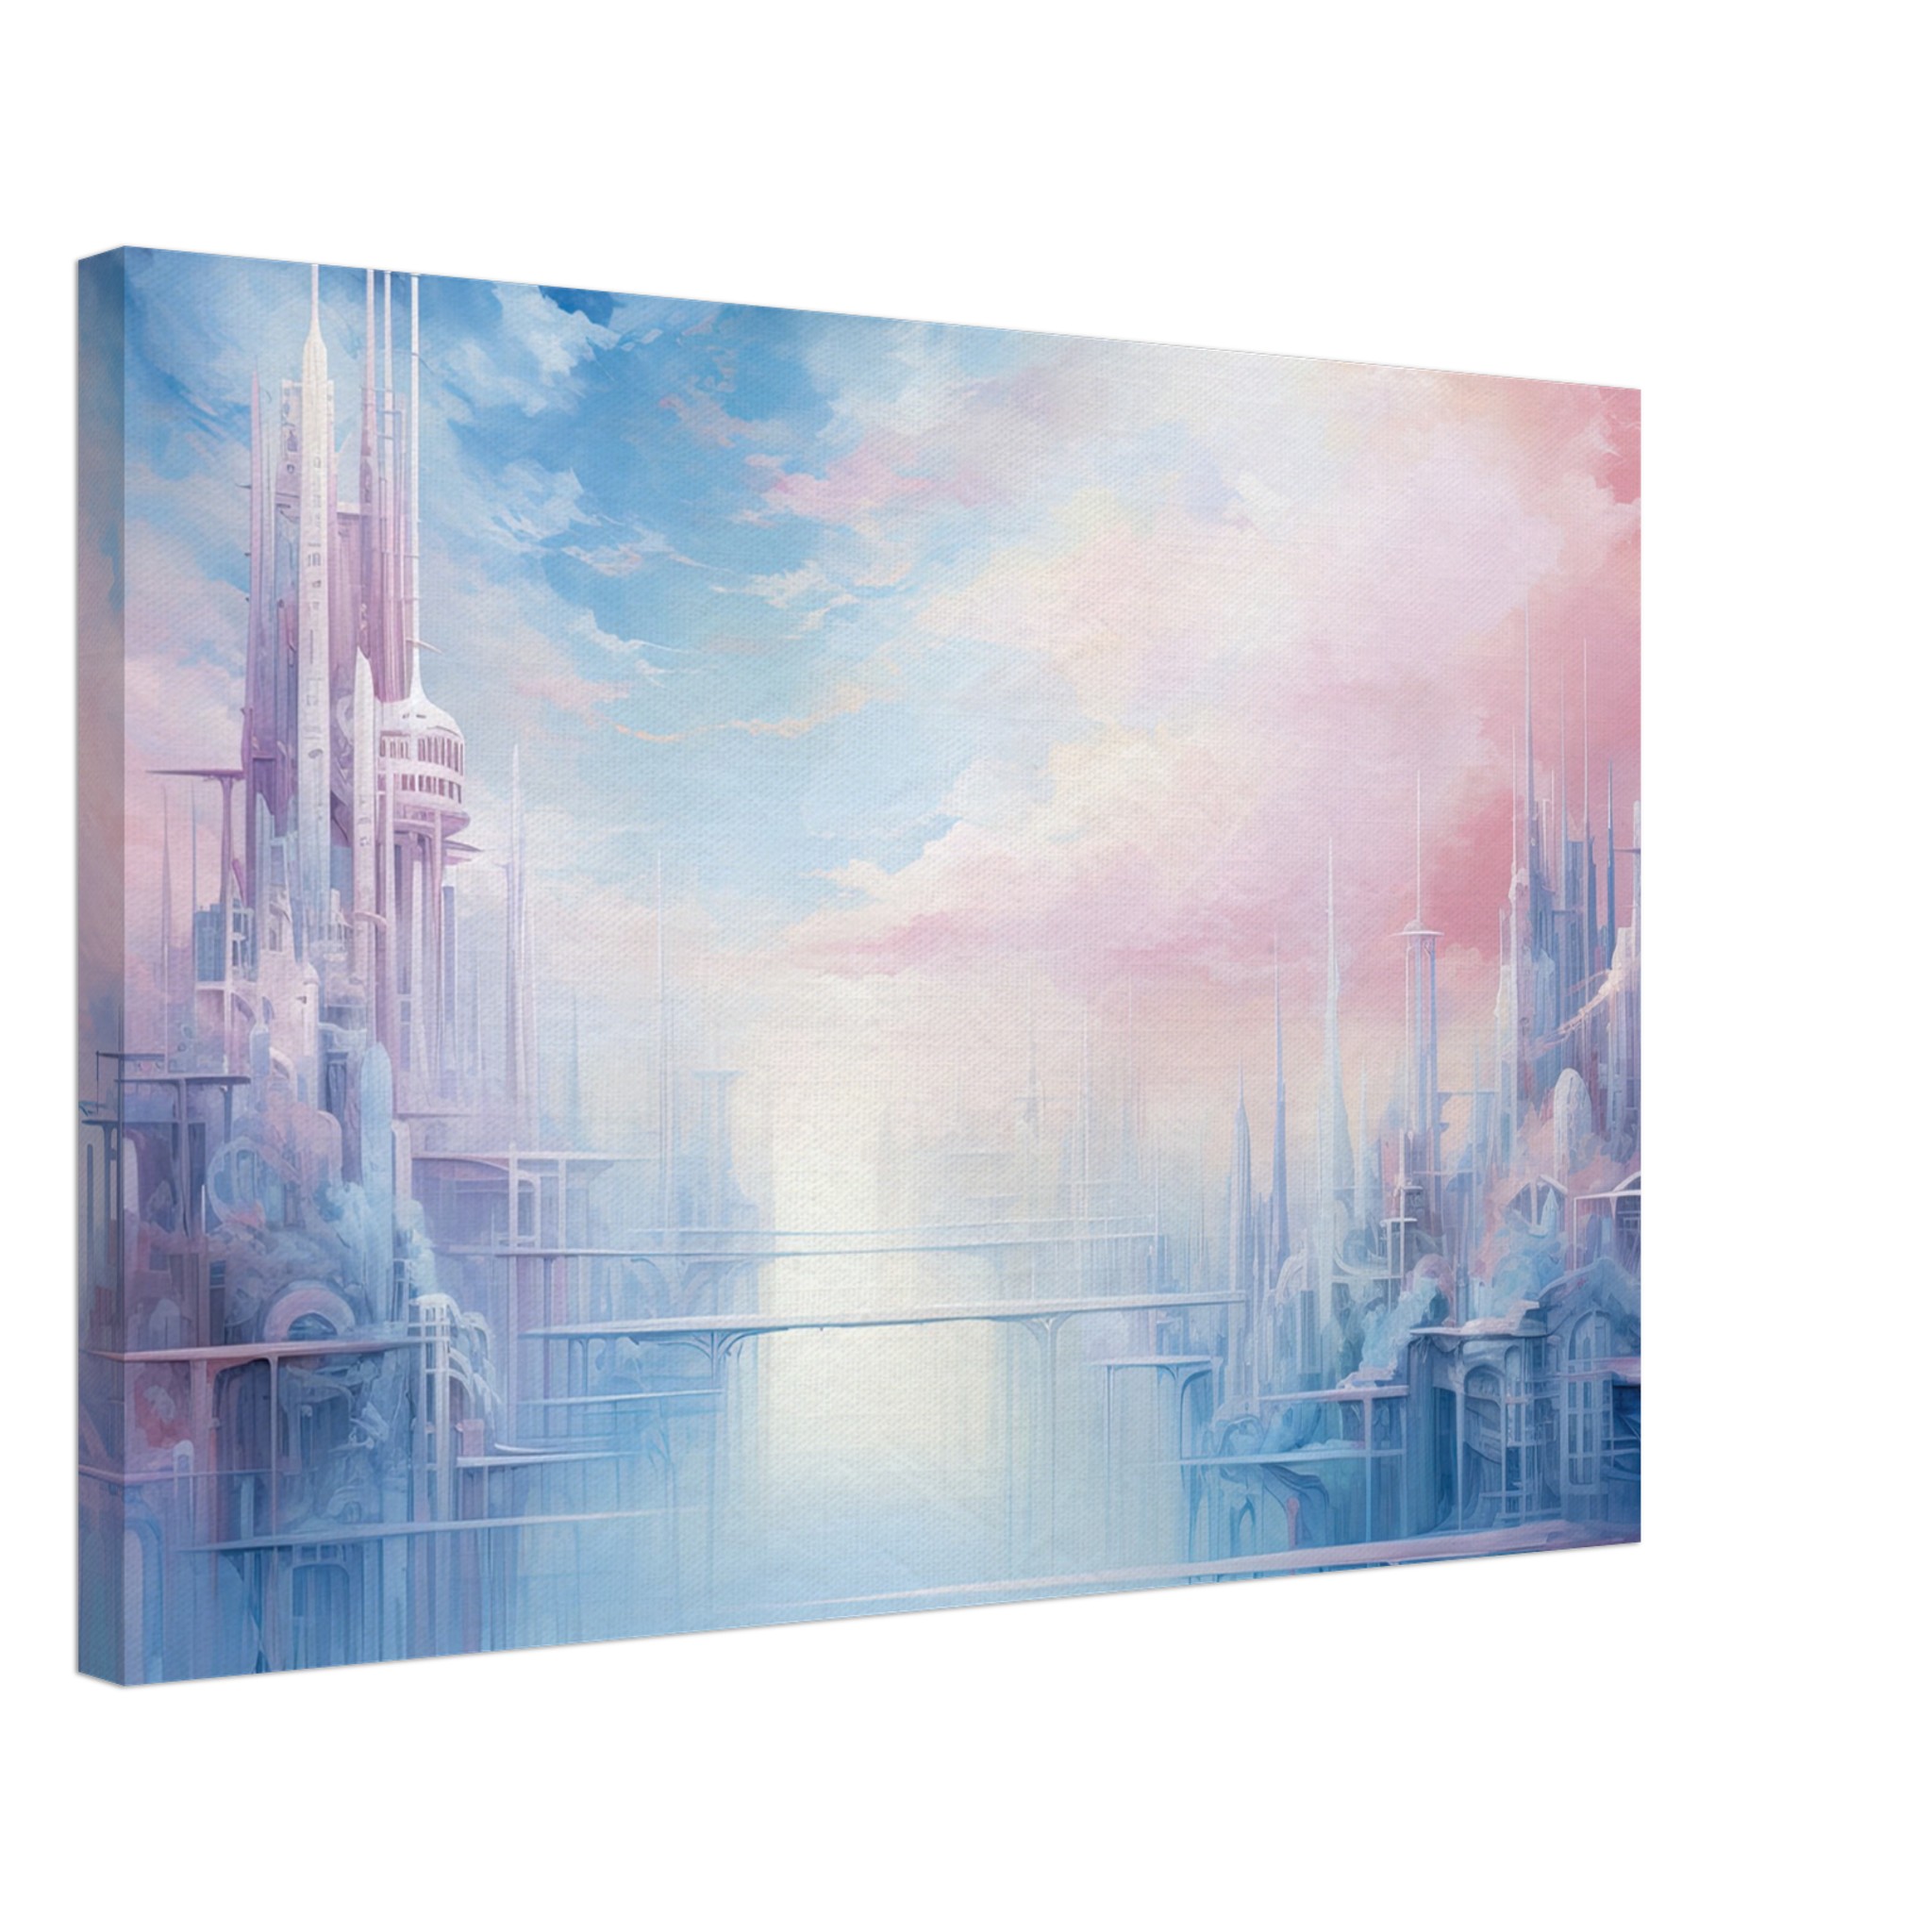 Pastel City in the Clouds Canvas Print – 50×75 cm / 20×30″, Thick